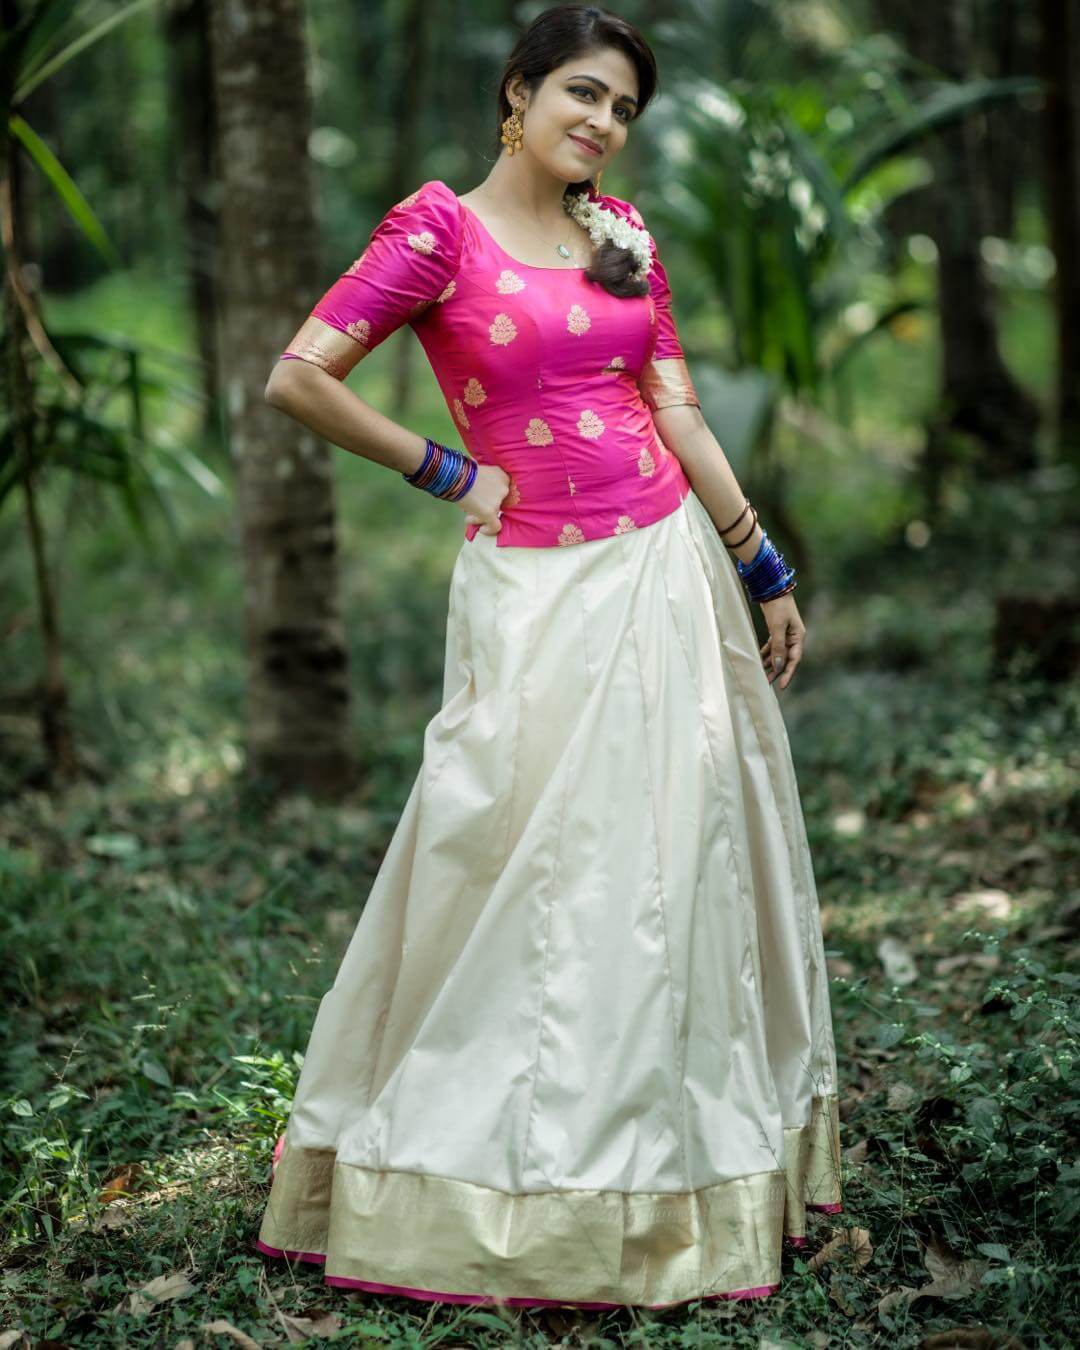 Malavika Wales In Pink Blouse With Off White Lehenga Skirt